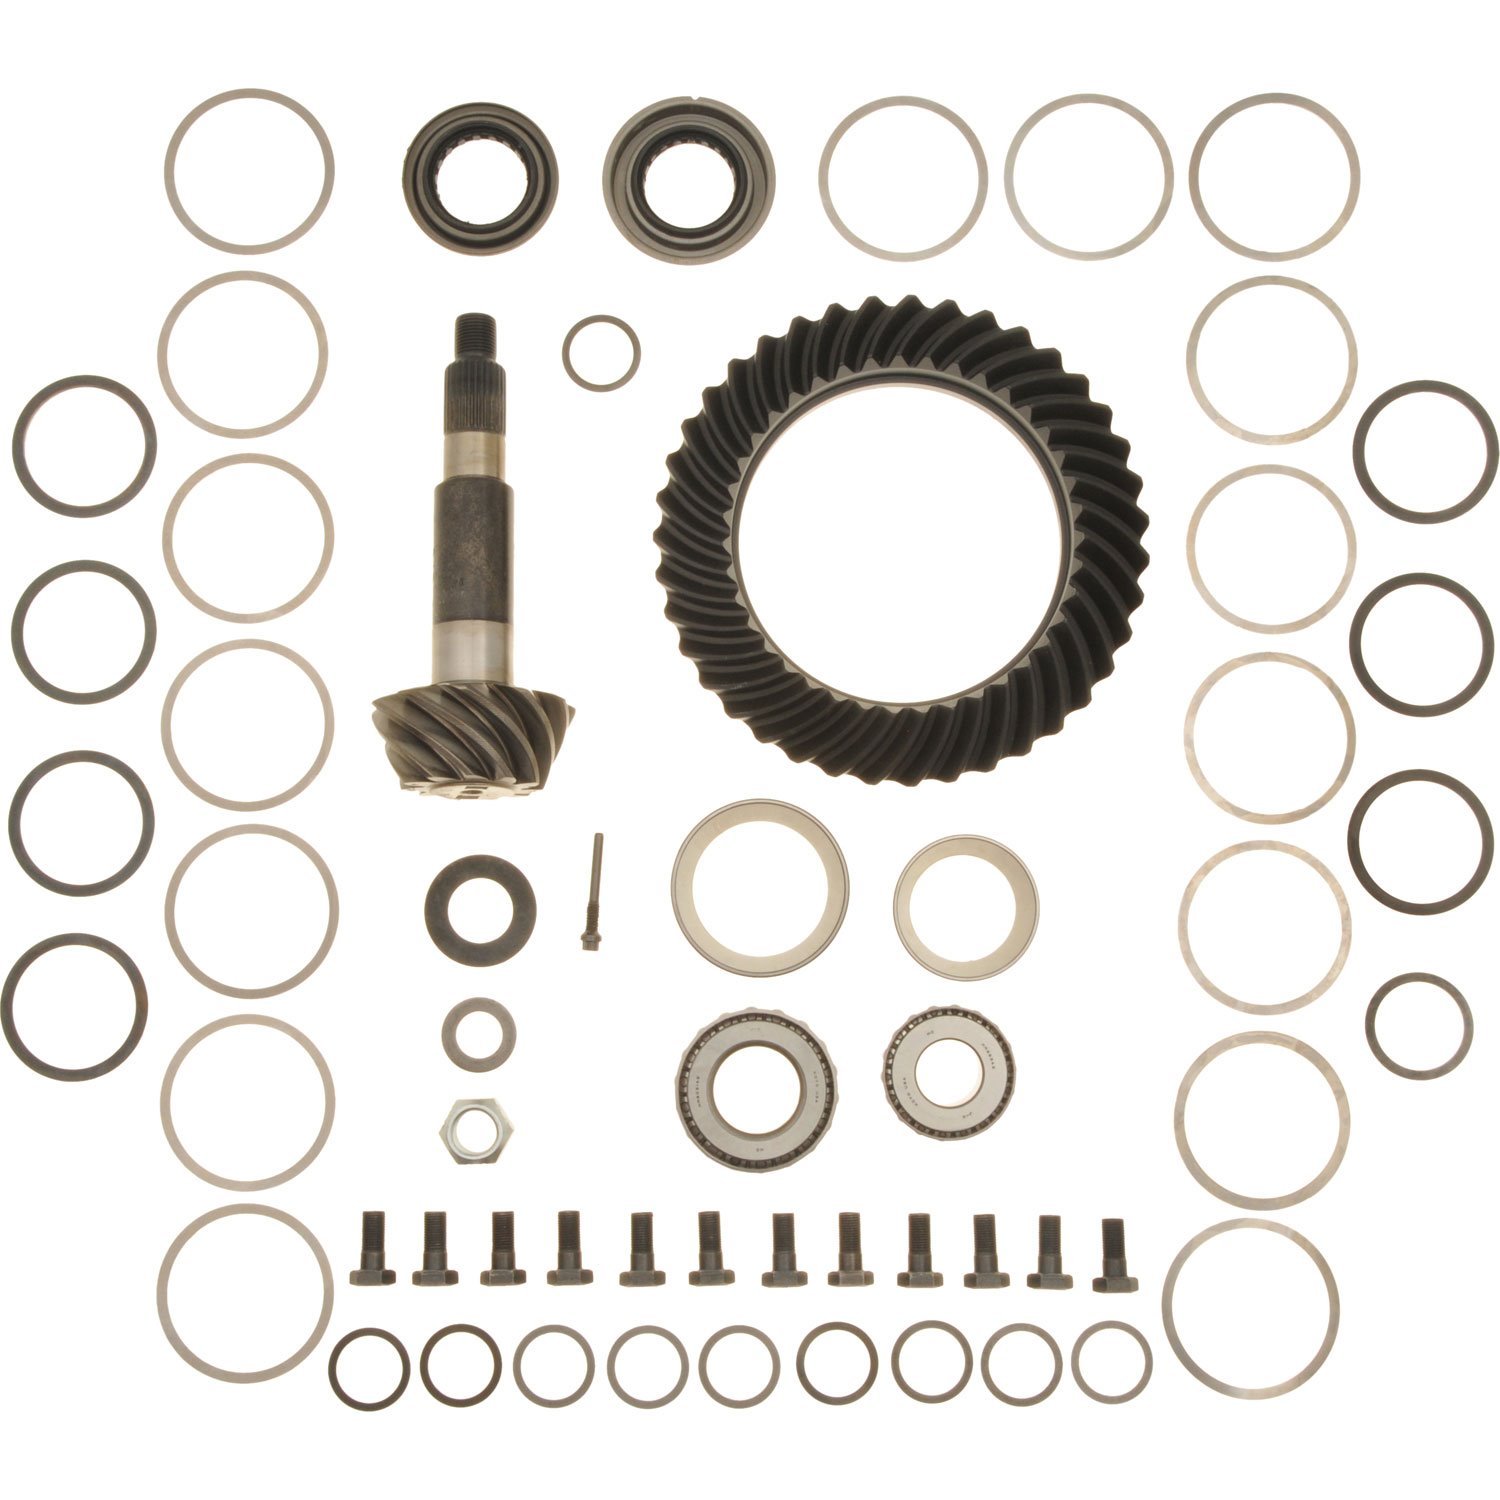 SPICER DIFFERENTIAL RING & PINION KIT DANA 60